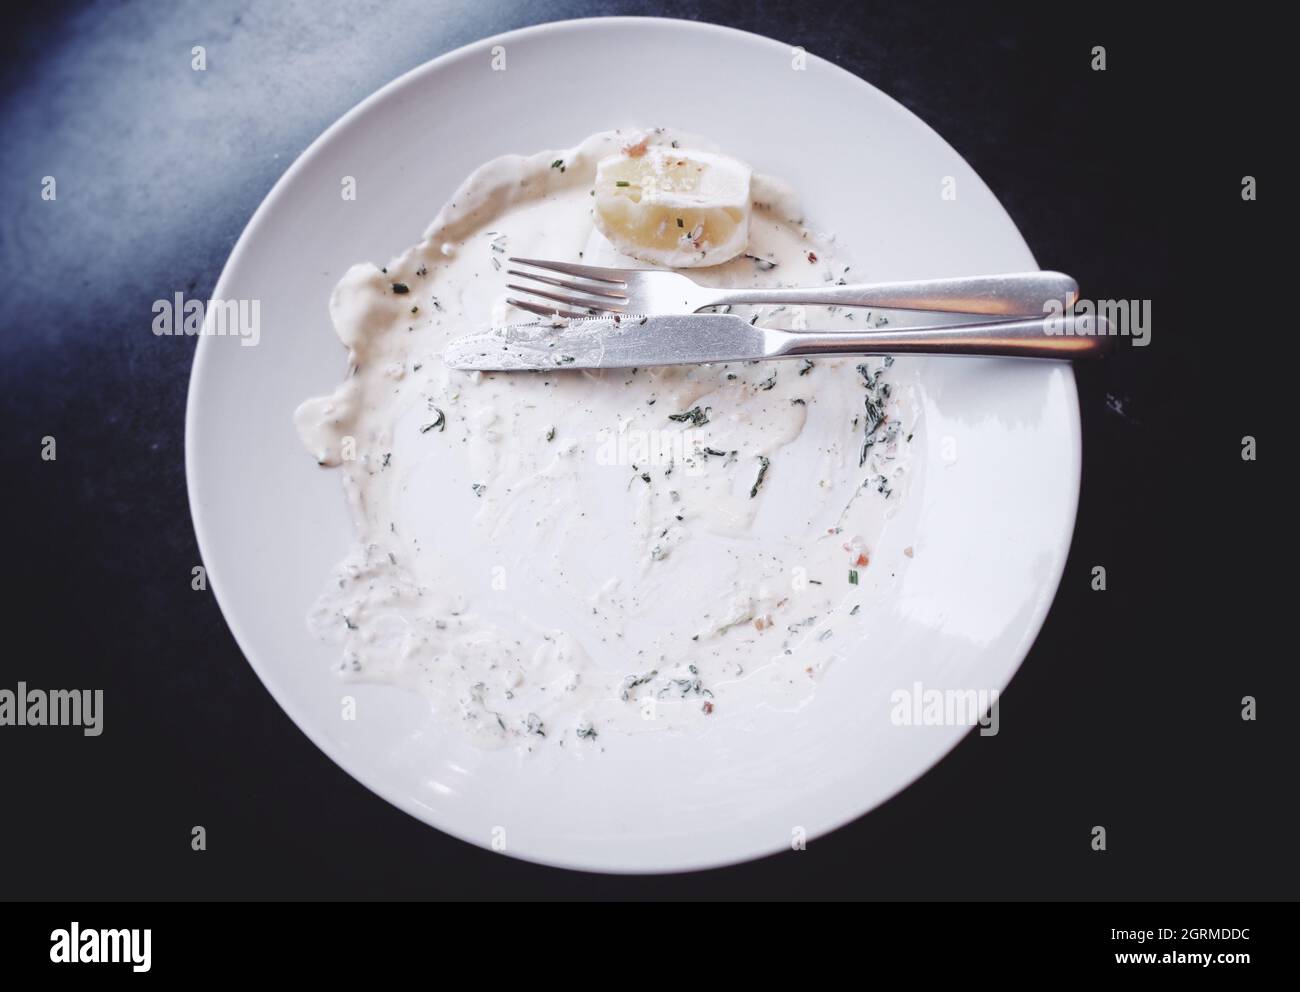 Directly Above View Of Leftovers In Plate Stock Photo